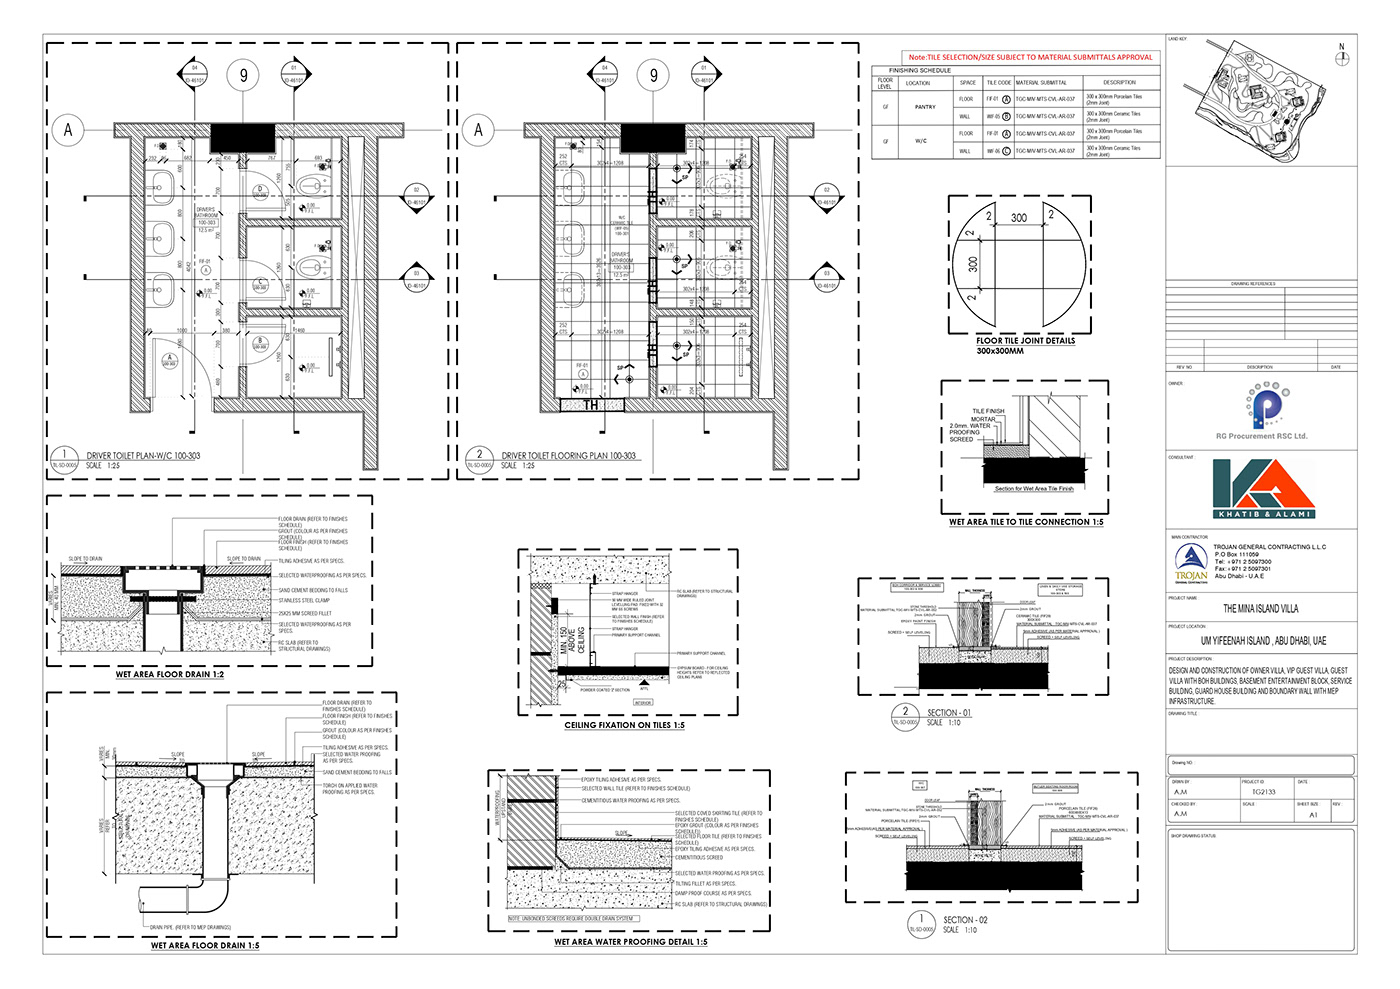 shopdrawing working drawings architecture modern interior design  3ds max details Revit Architecture design architect